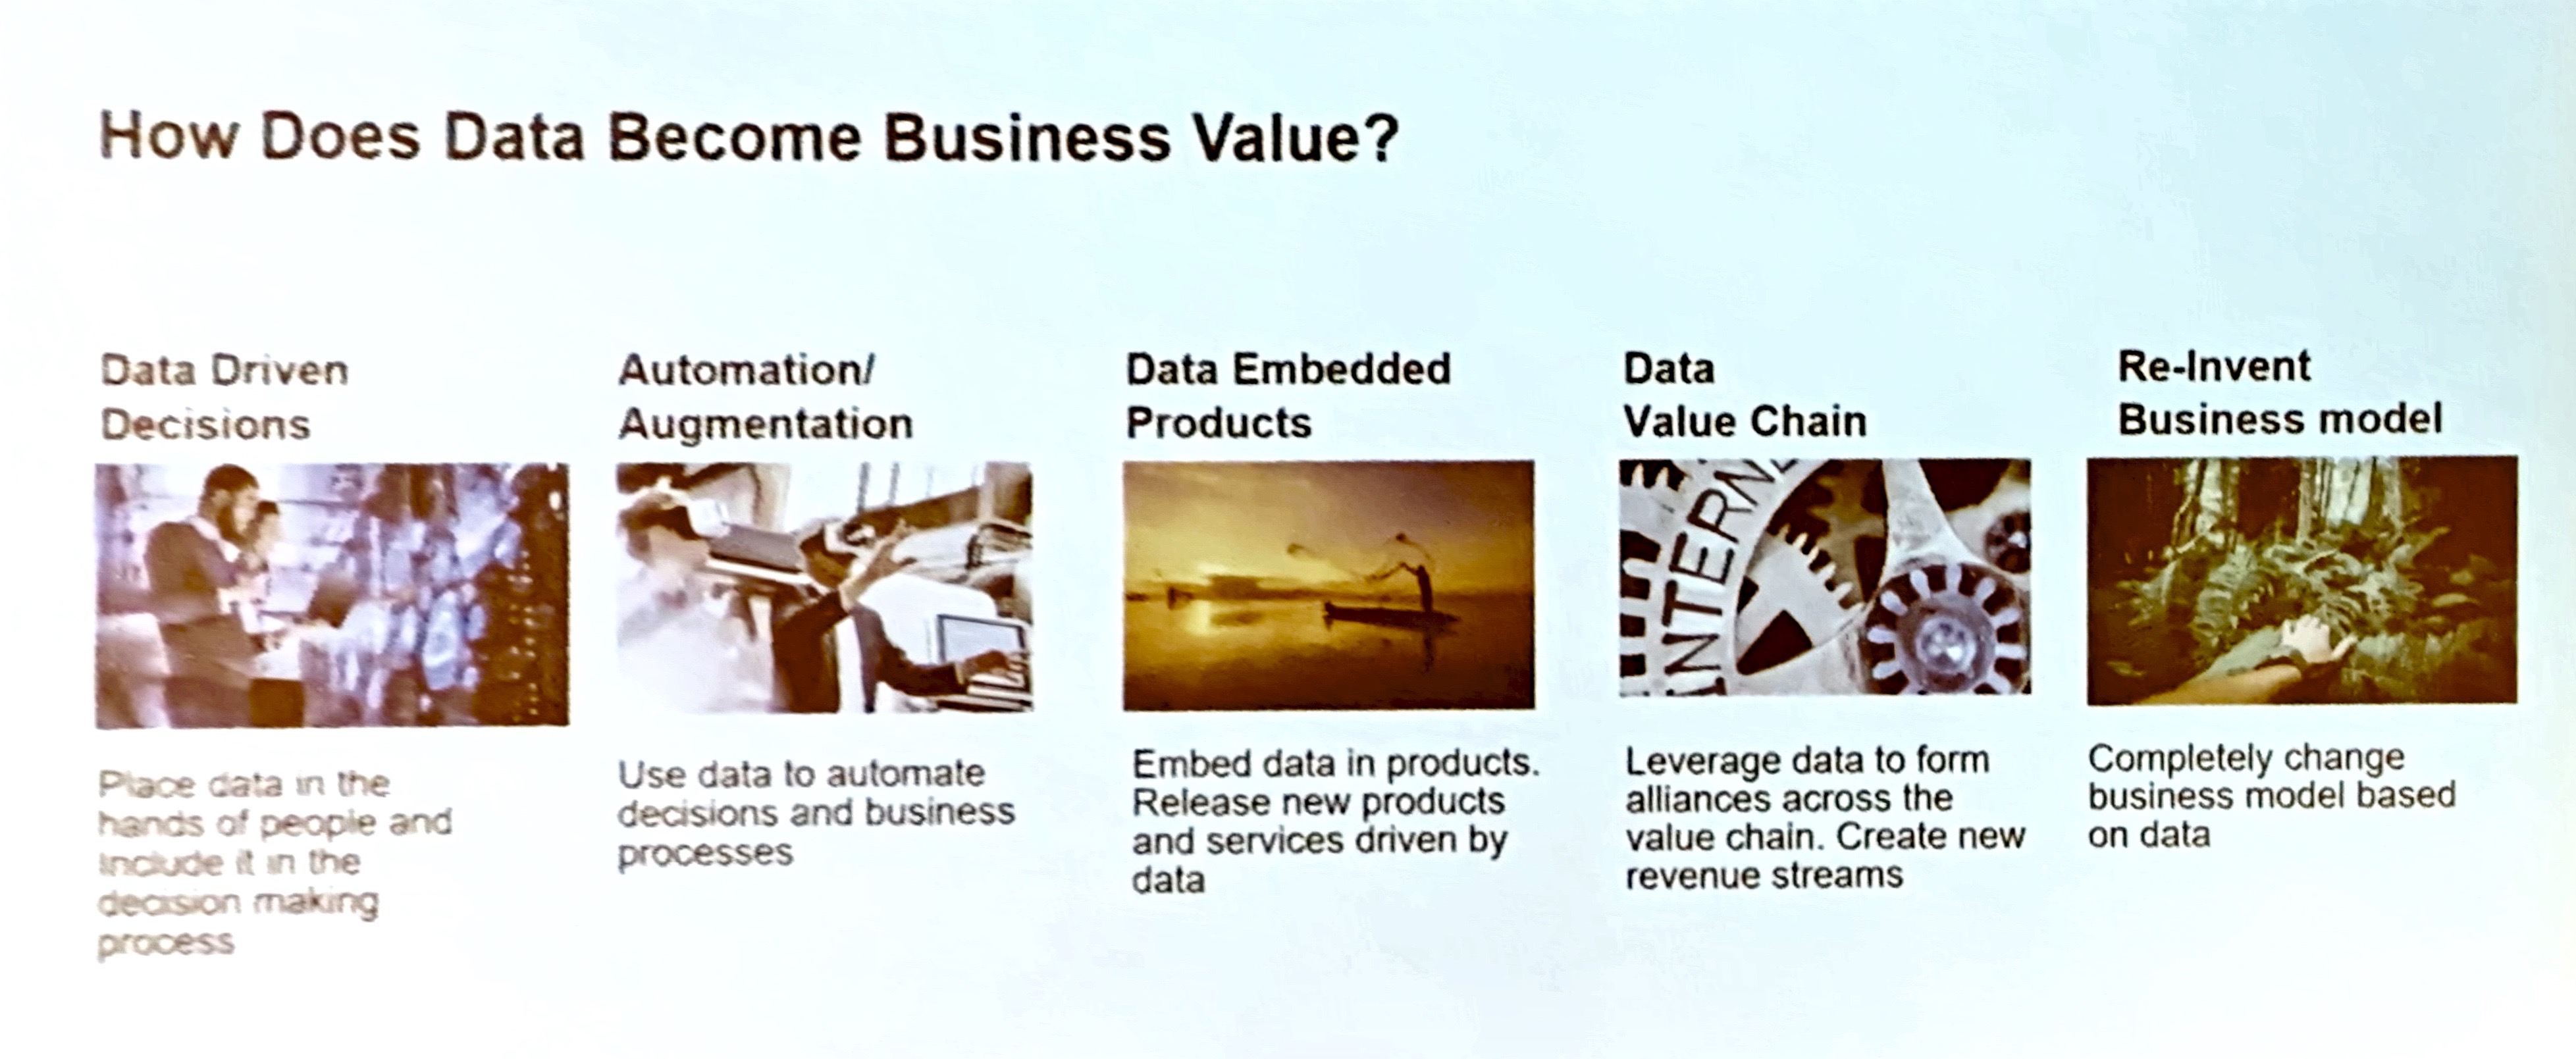 How Data Becomes Business Value